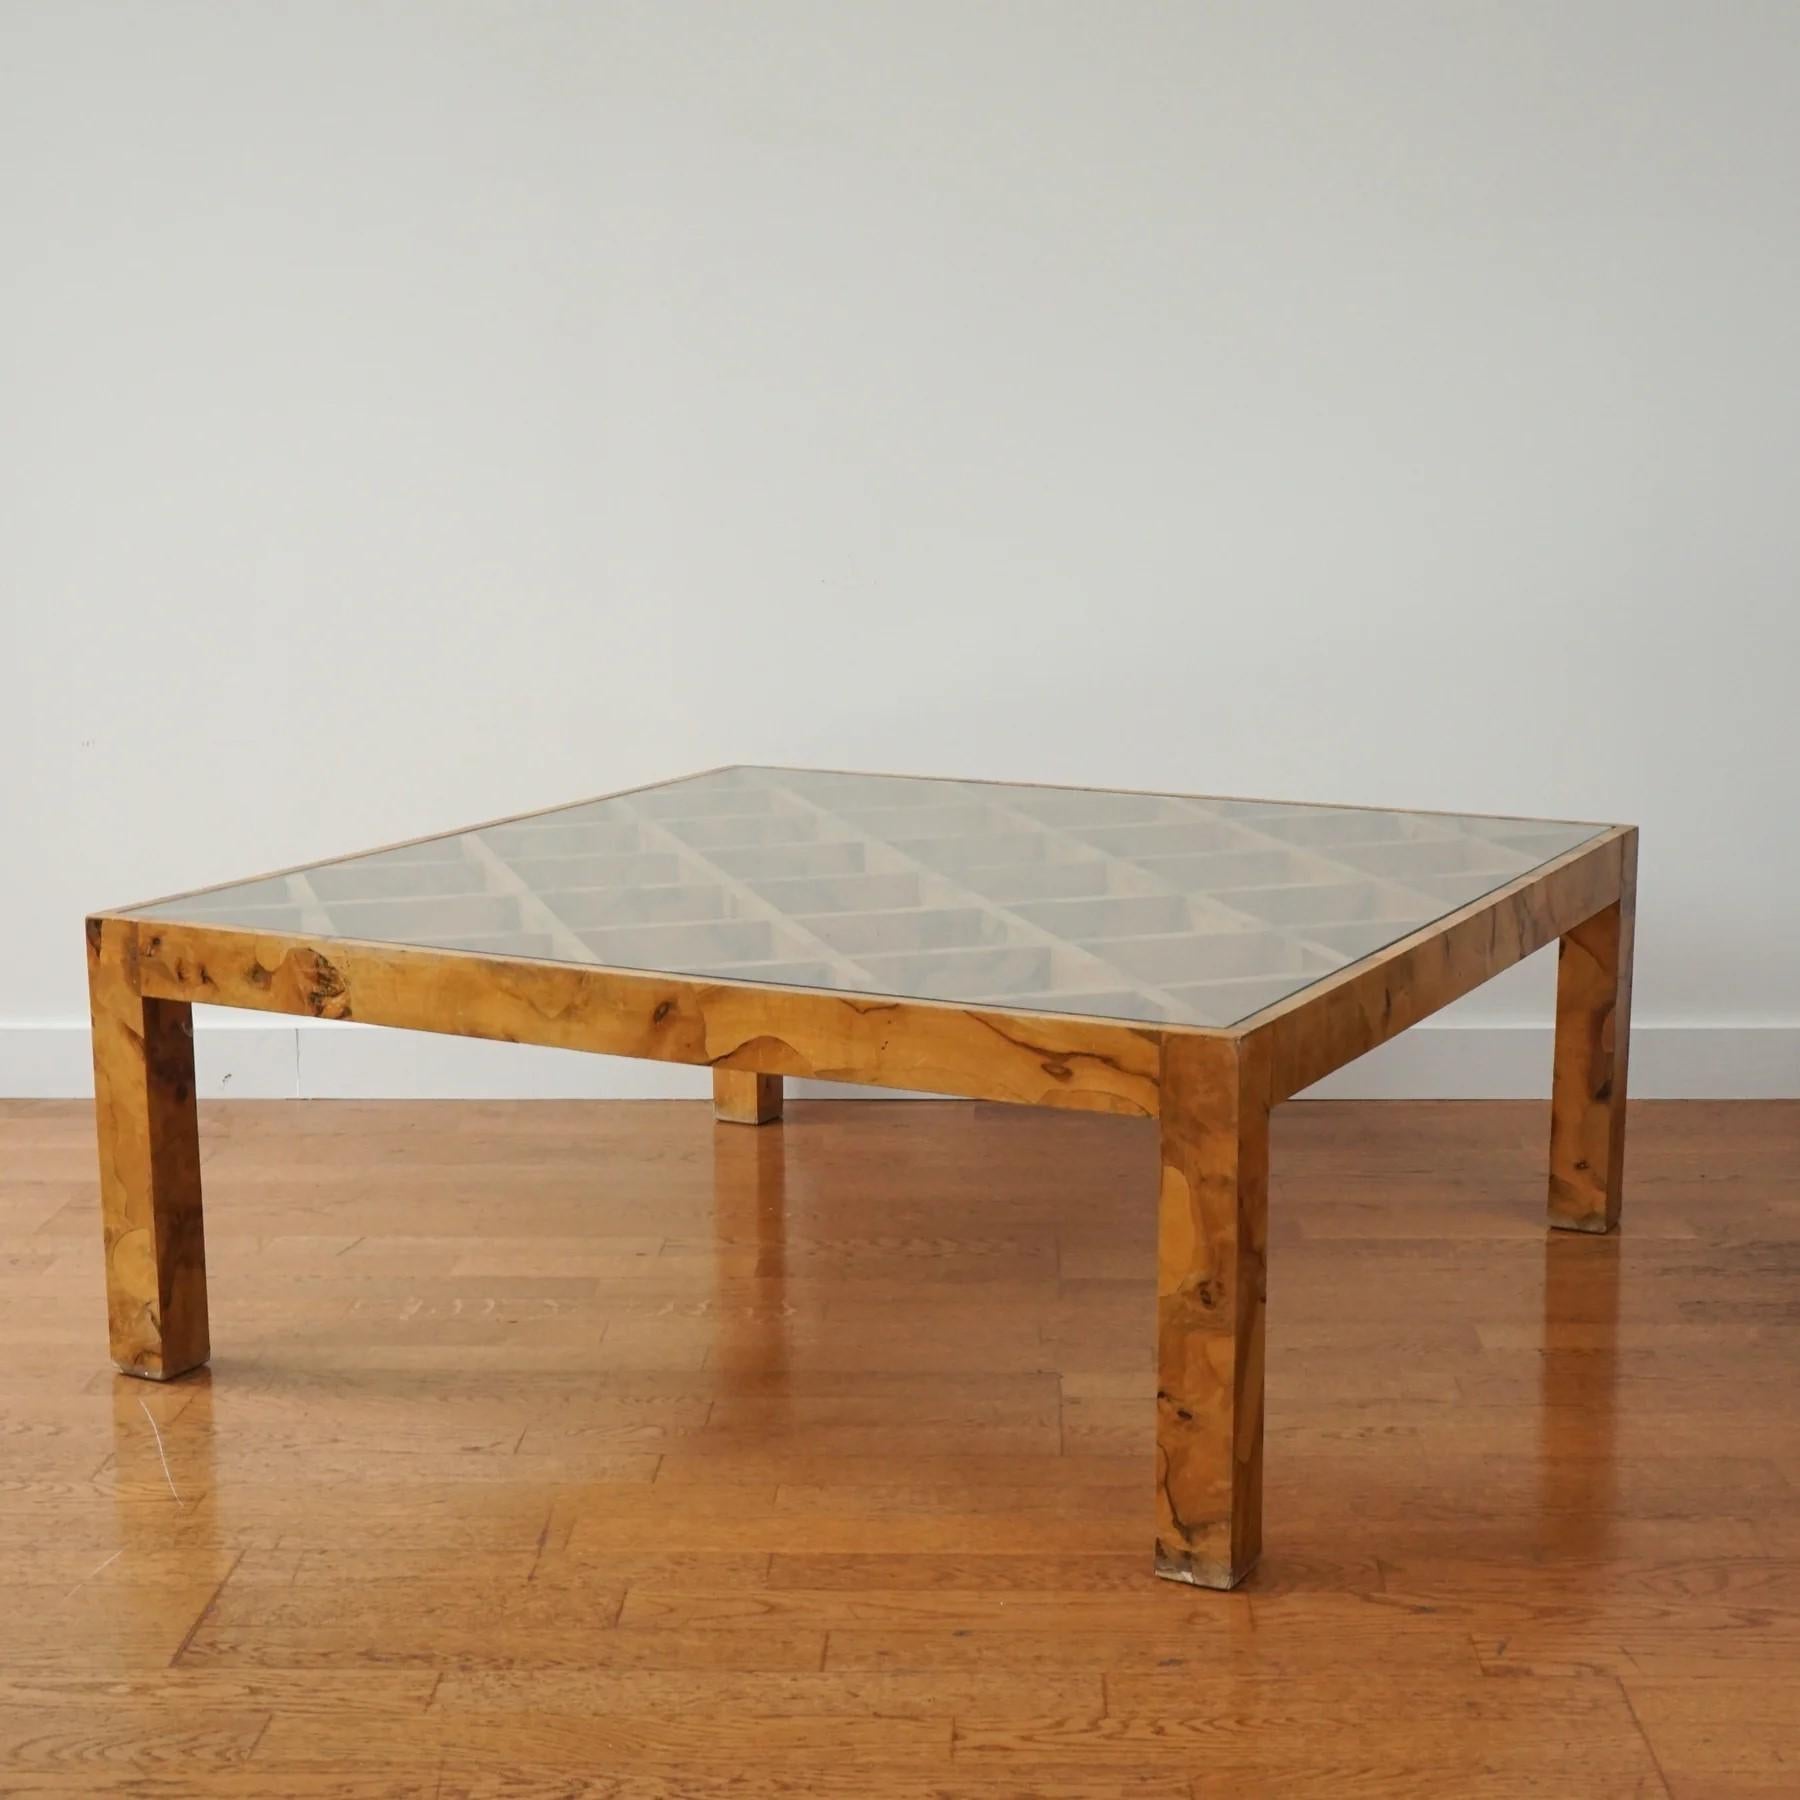 Large square burlwood coffee table with interesting lattice work detail and a glass top.